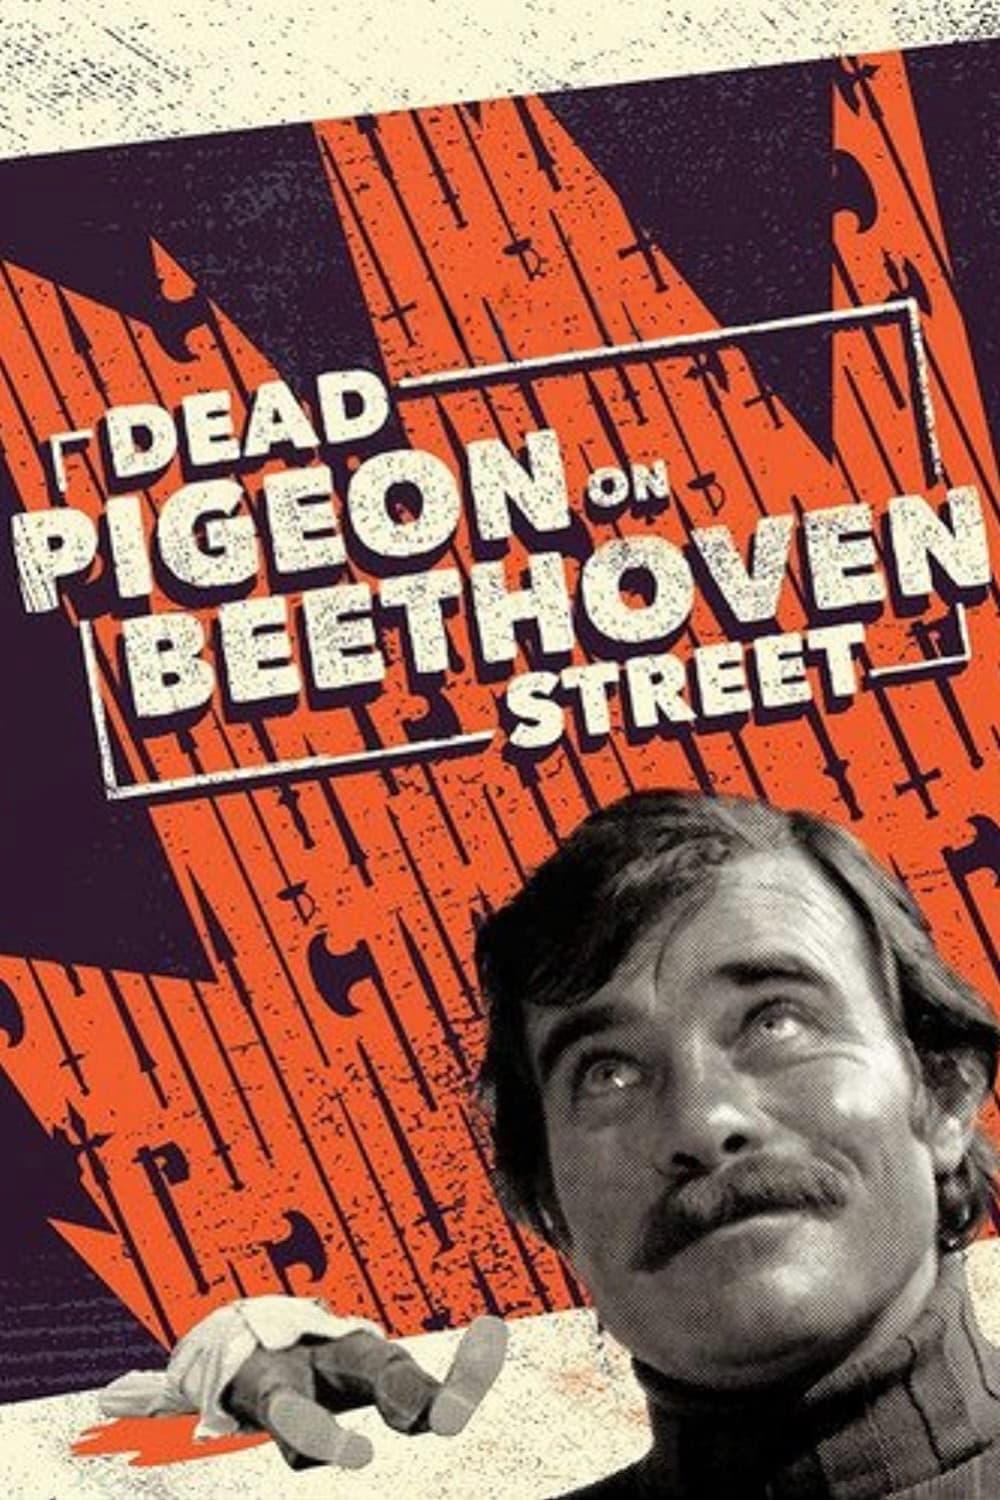 Dead Pigeon on Beethoven Street poster